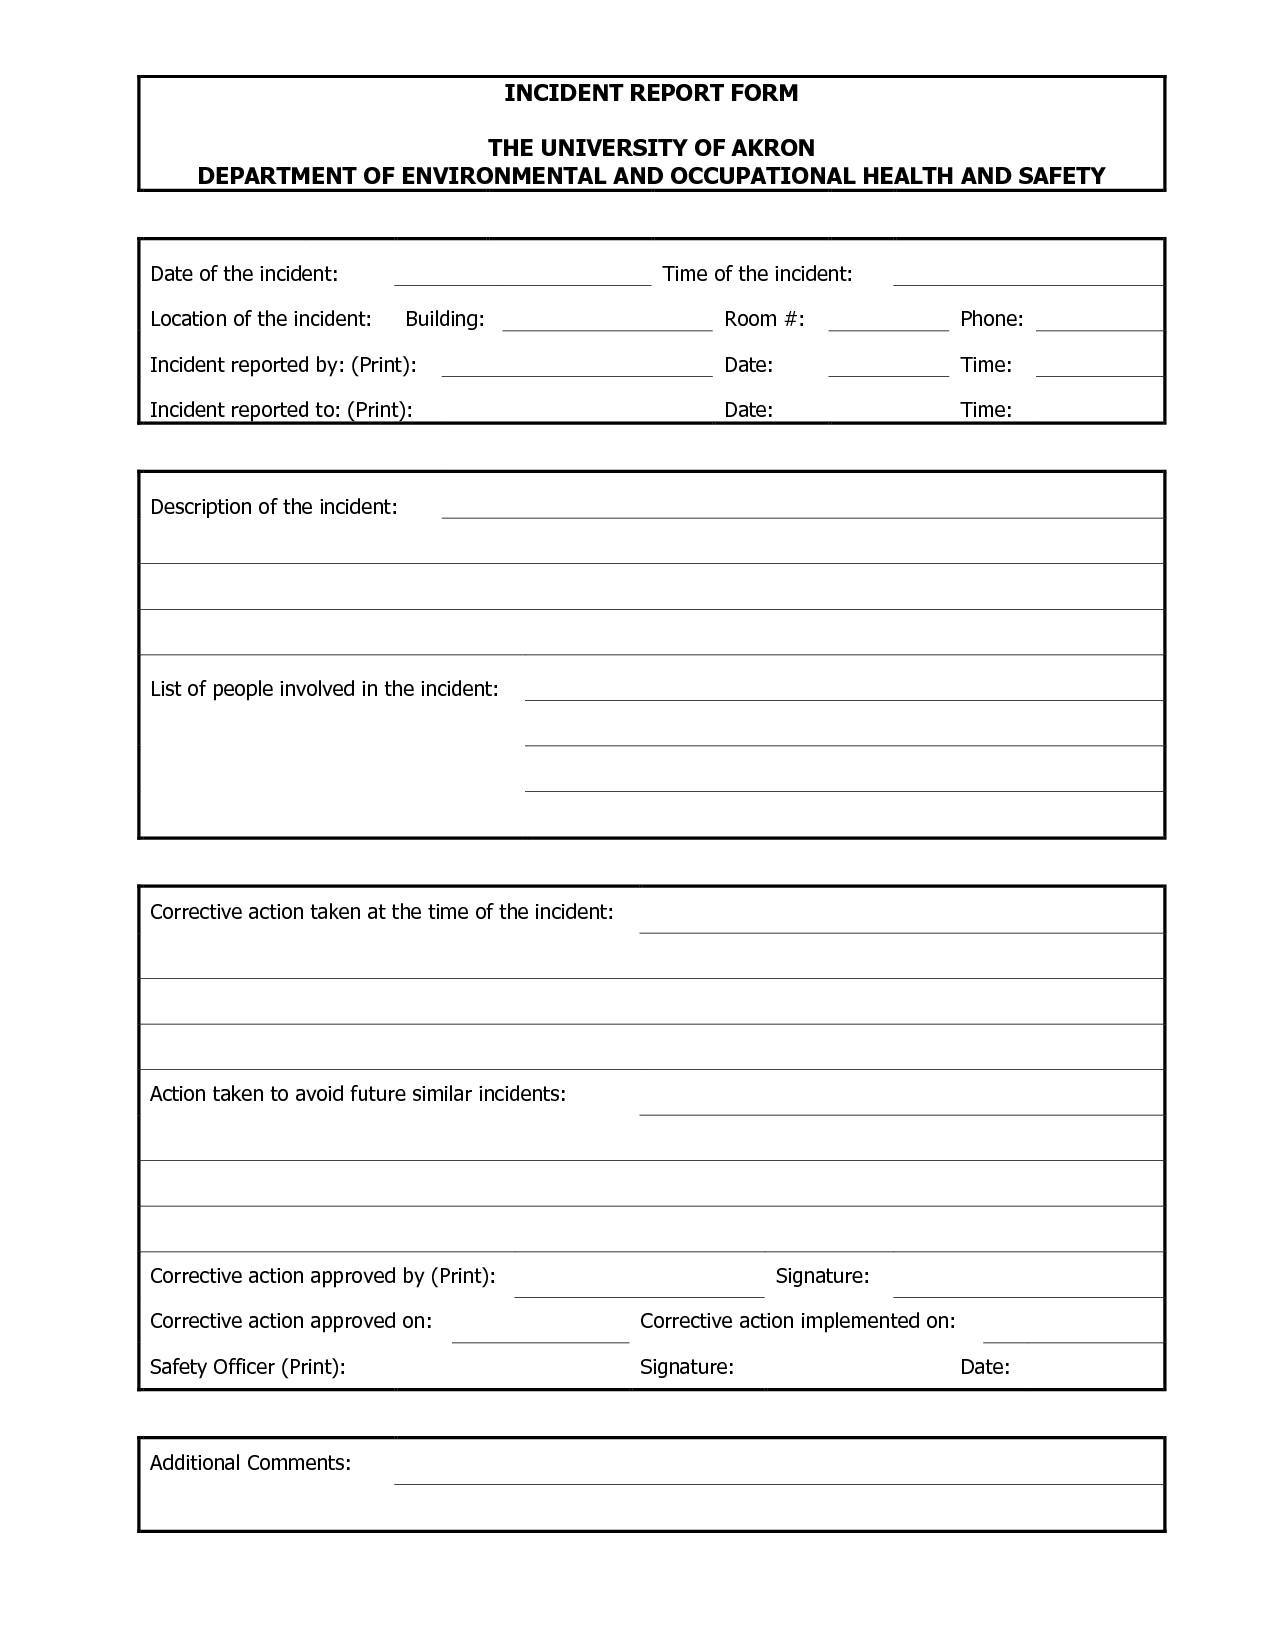 Blank Incident Report Form Template ] – Blank Incident Within Incident Report Book Template